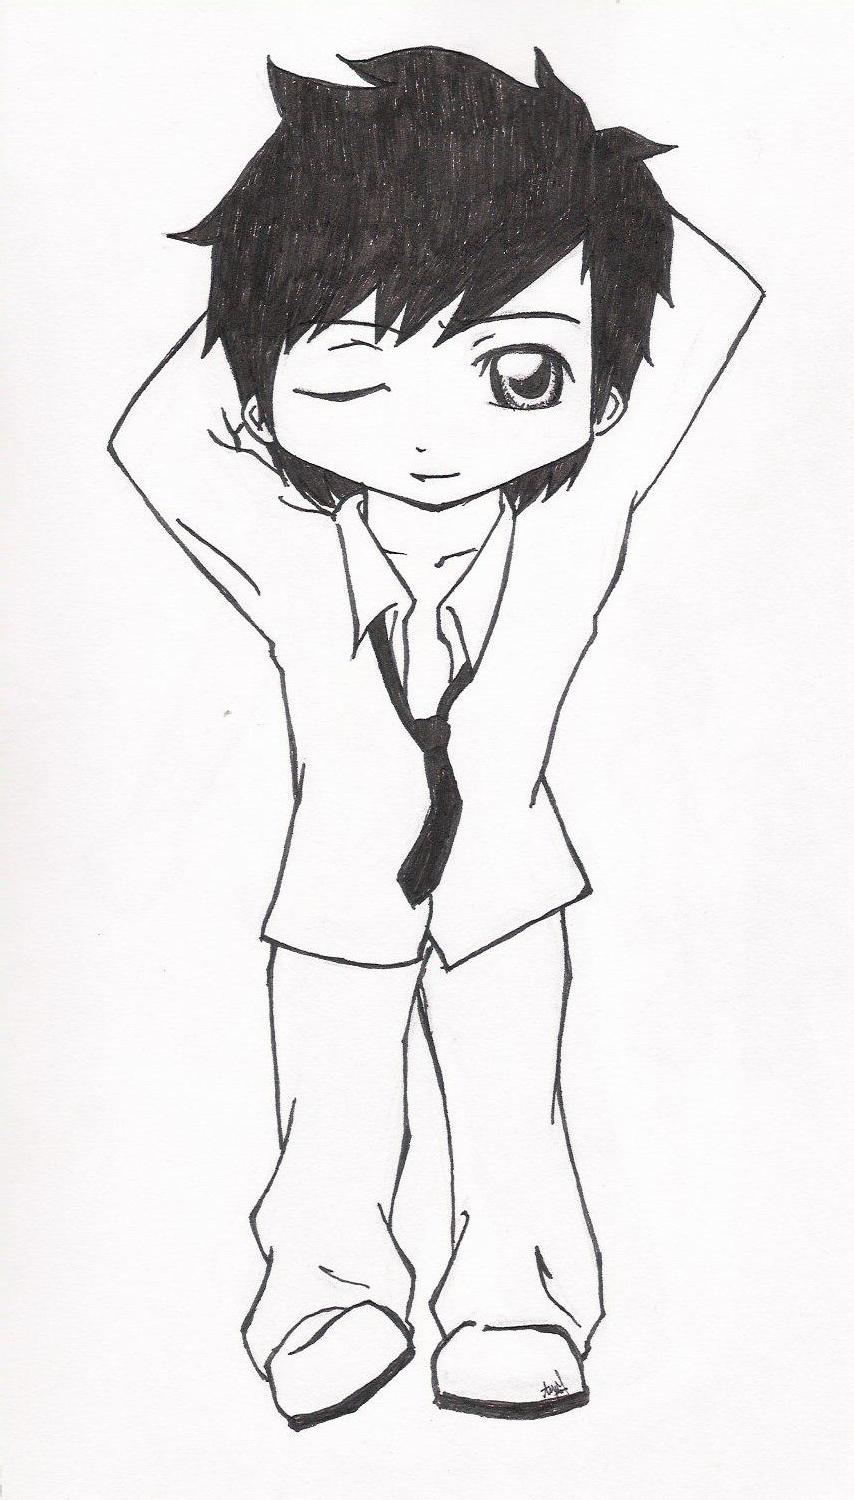 Simple drawing of a chibi anime boy